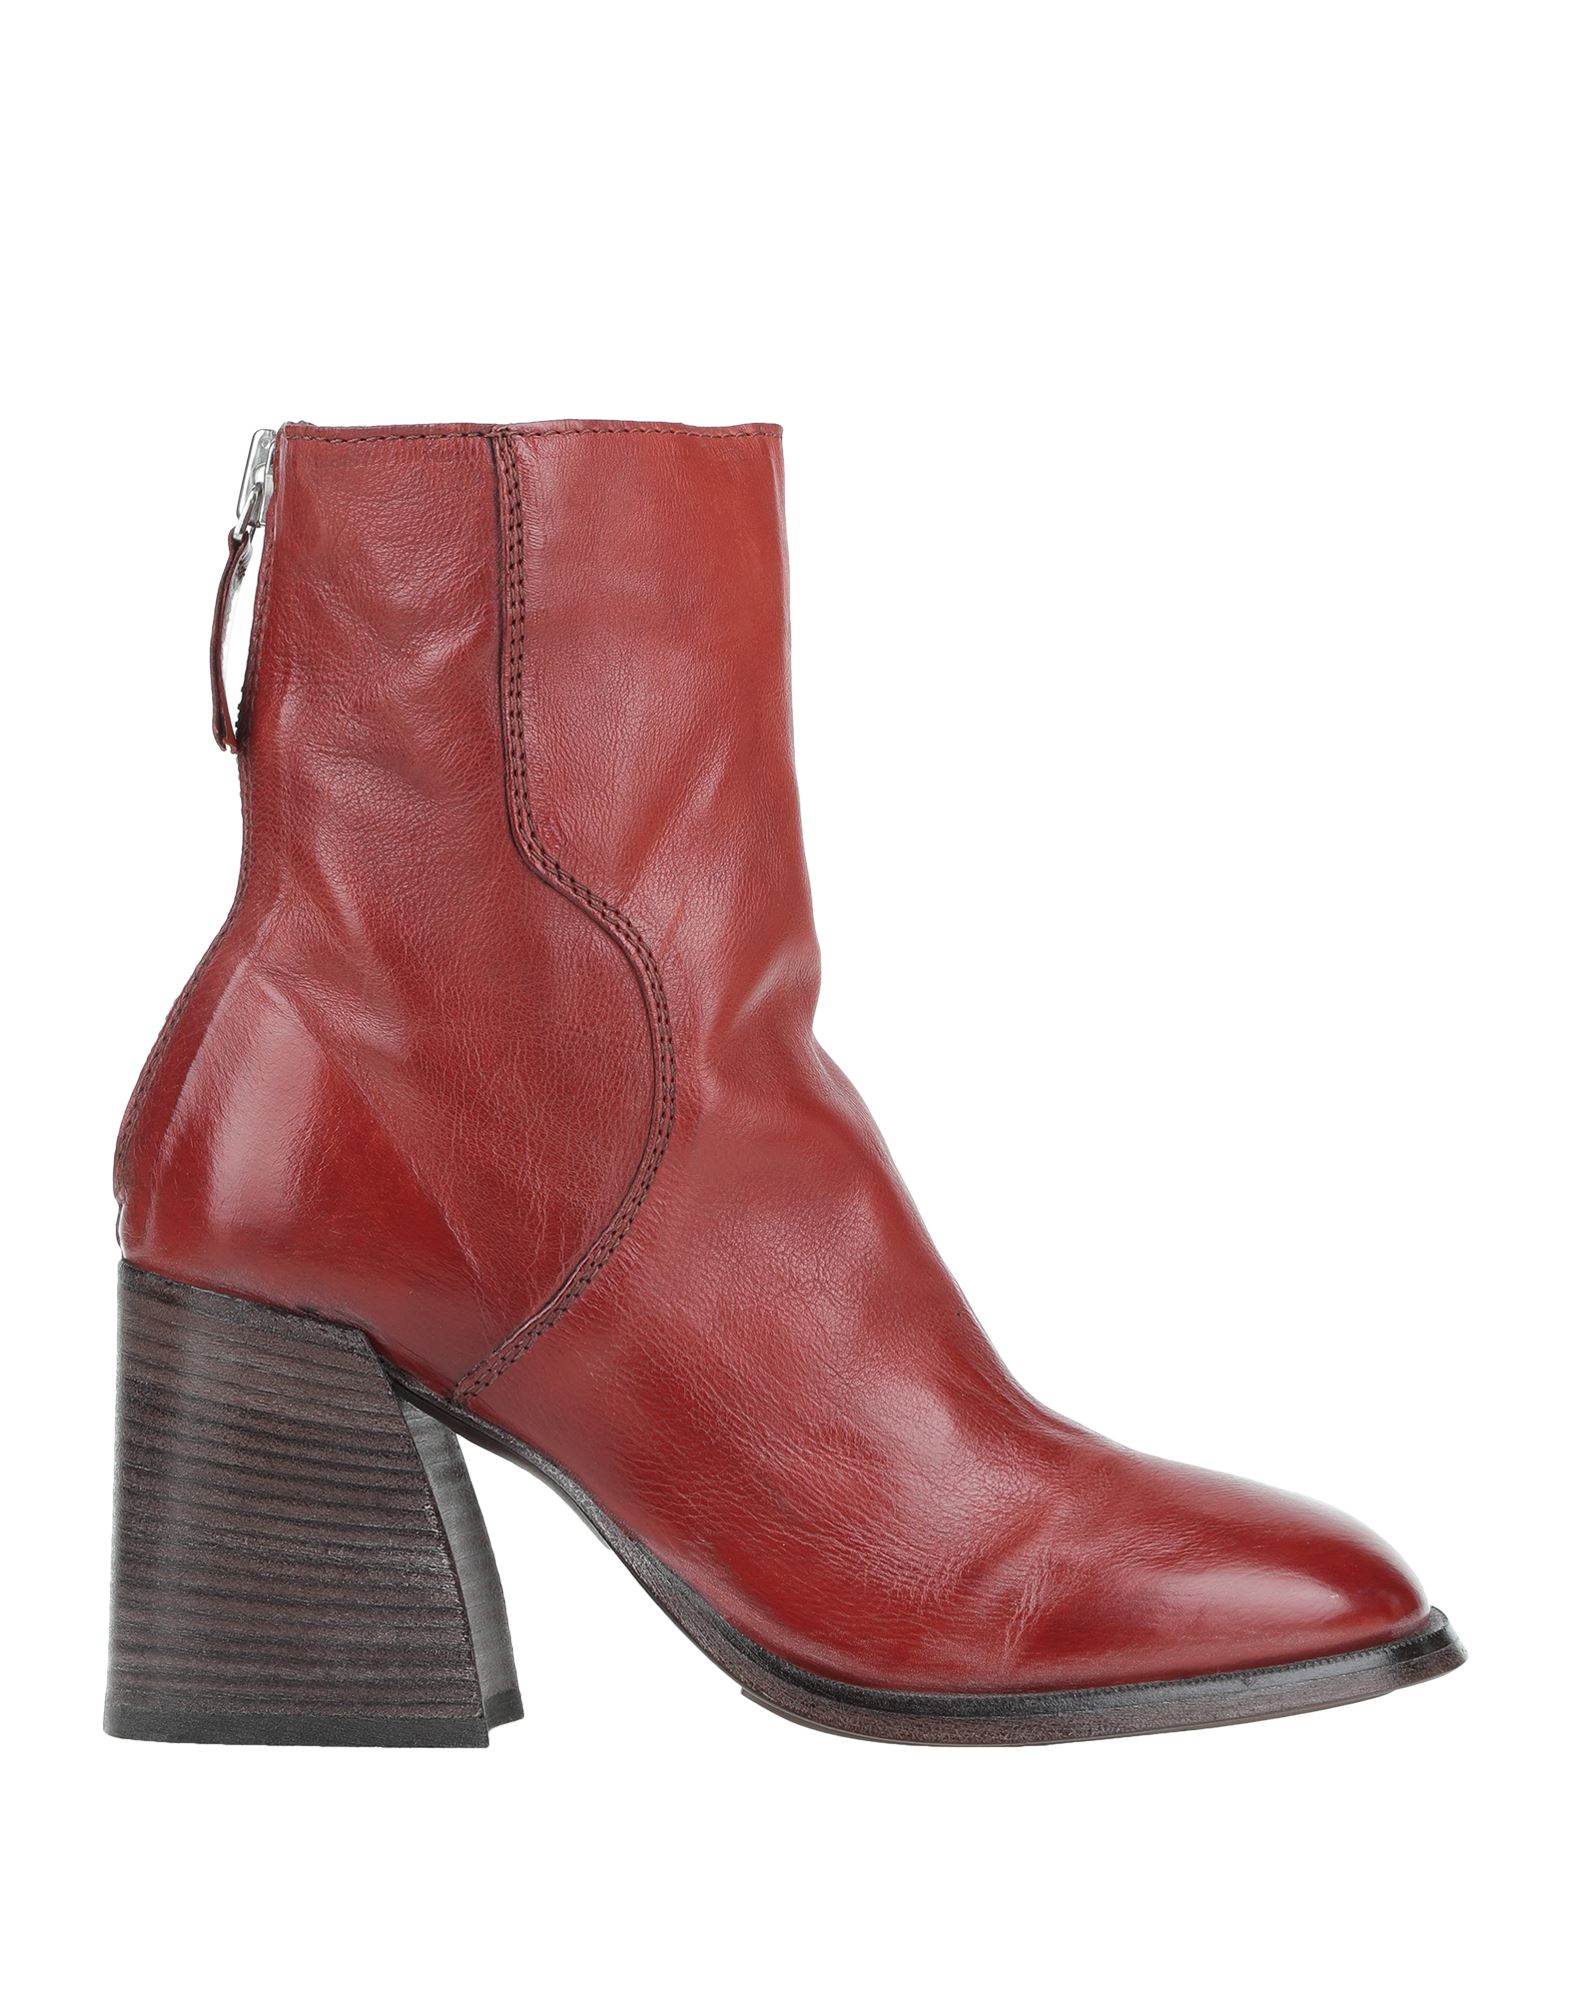 Moma Ankle Boots In Brick Red